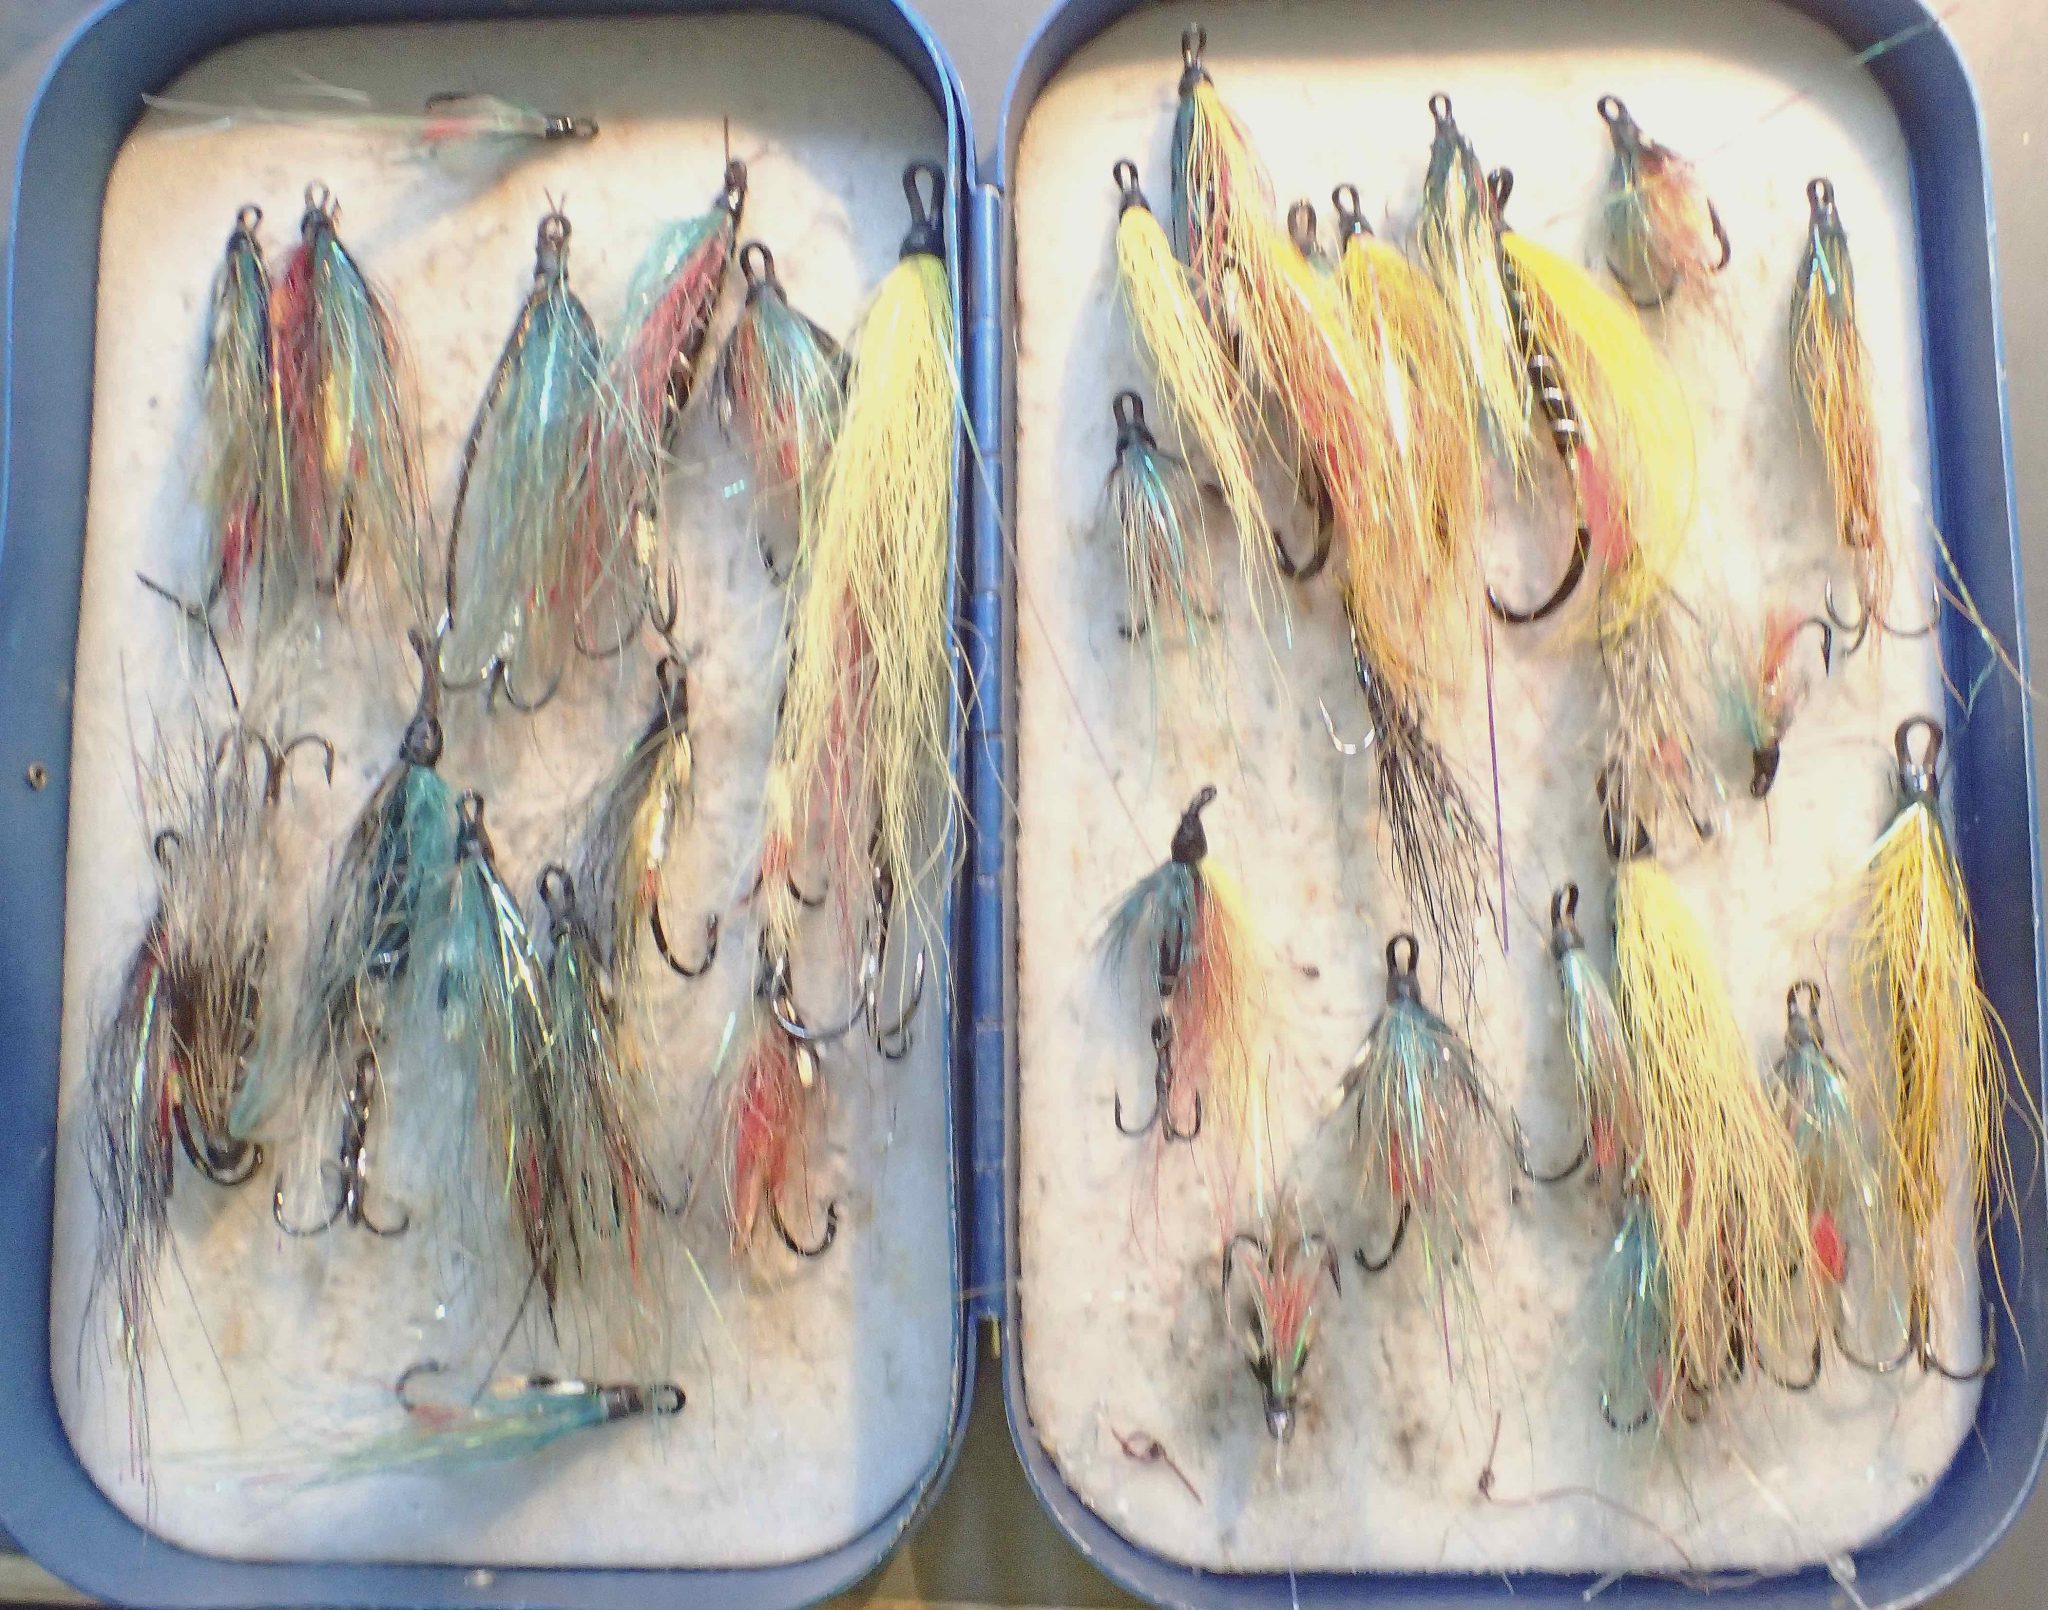 Ready Fly Box - Dry Flies For Salmon